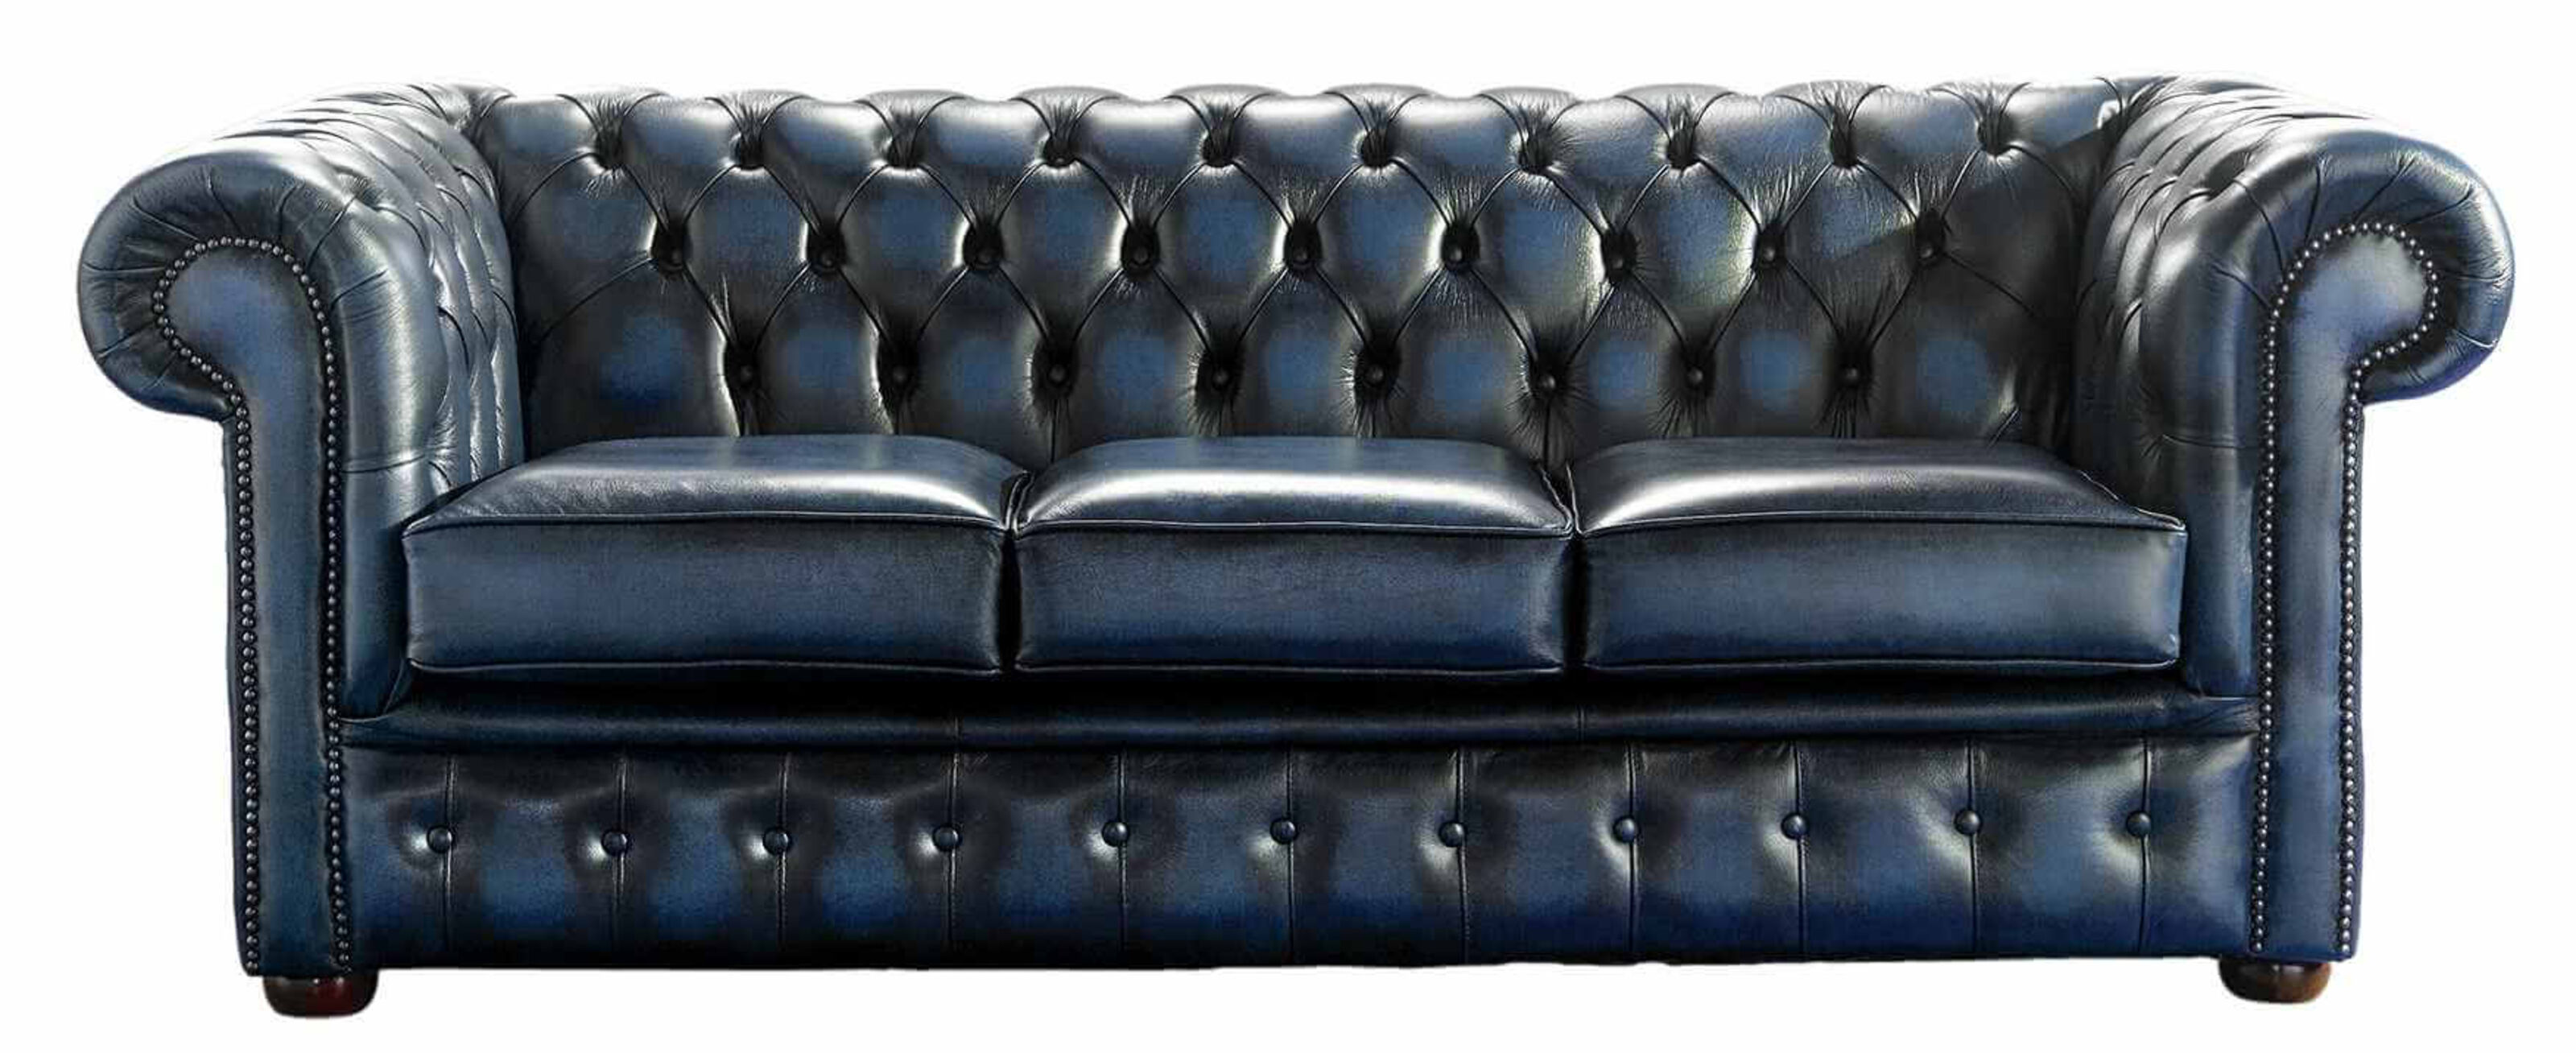 Crafting Your Dream Chesterfield Sofa: A Guide to Custom Creations  %Post Title